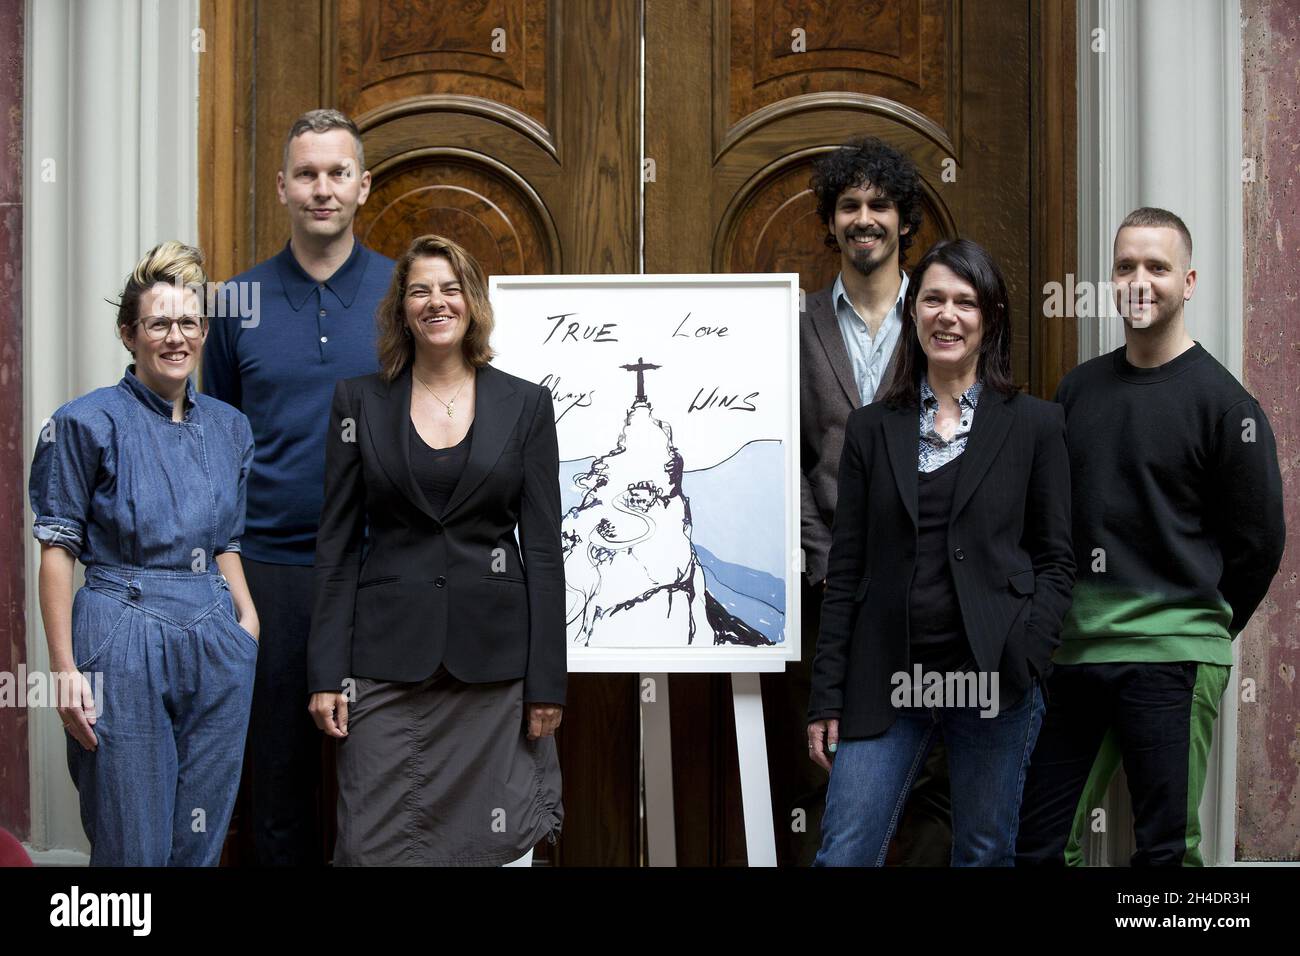 (L-R) Artists Anne Hardy, David Shrigley, Tracey Emin, Benjamin Senior, Sarah Jones and Eddie Peake at the Royal Academy of Arts, central London, to unveil Tracey Emin's print, True Love Always Wins, 2016, the first of a set of official fine art prints to celebrate Team GB's participation in the 2016 Rio Olympic Games  on Thursday 9 June.  Stock Photo